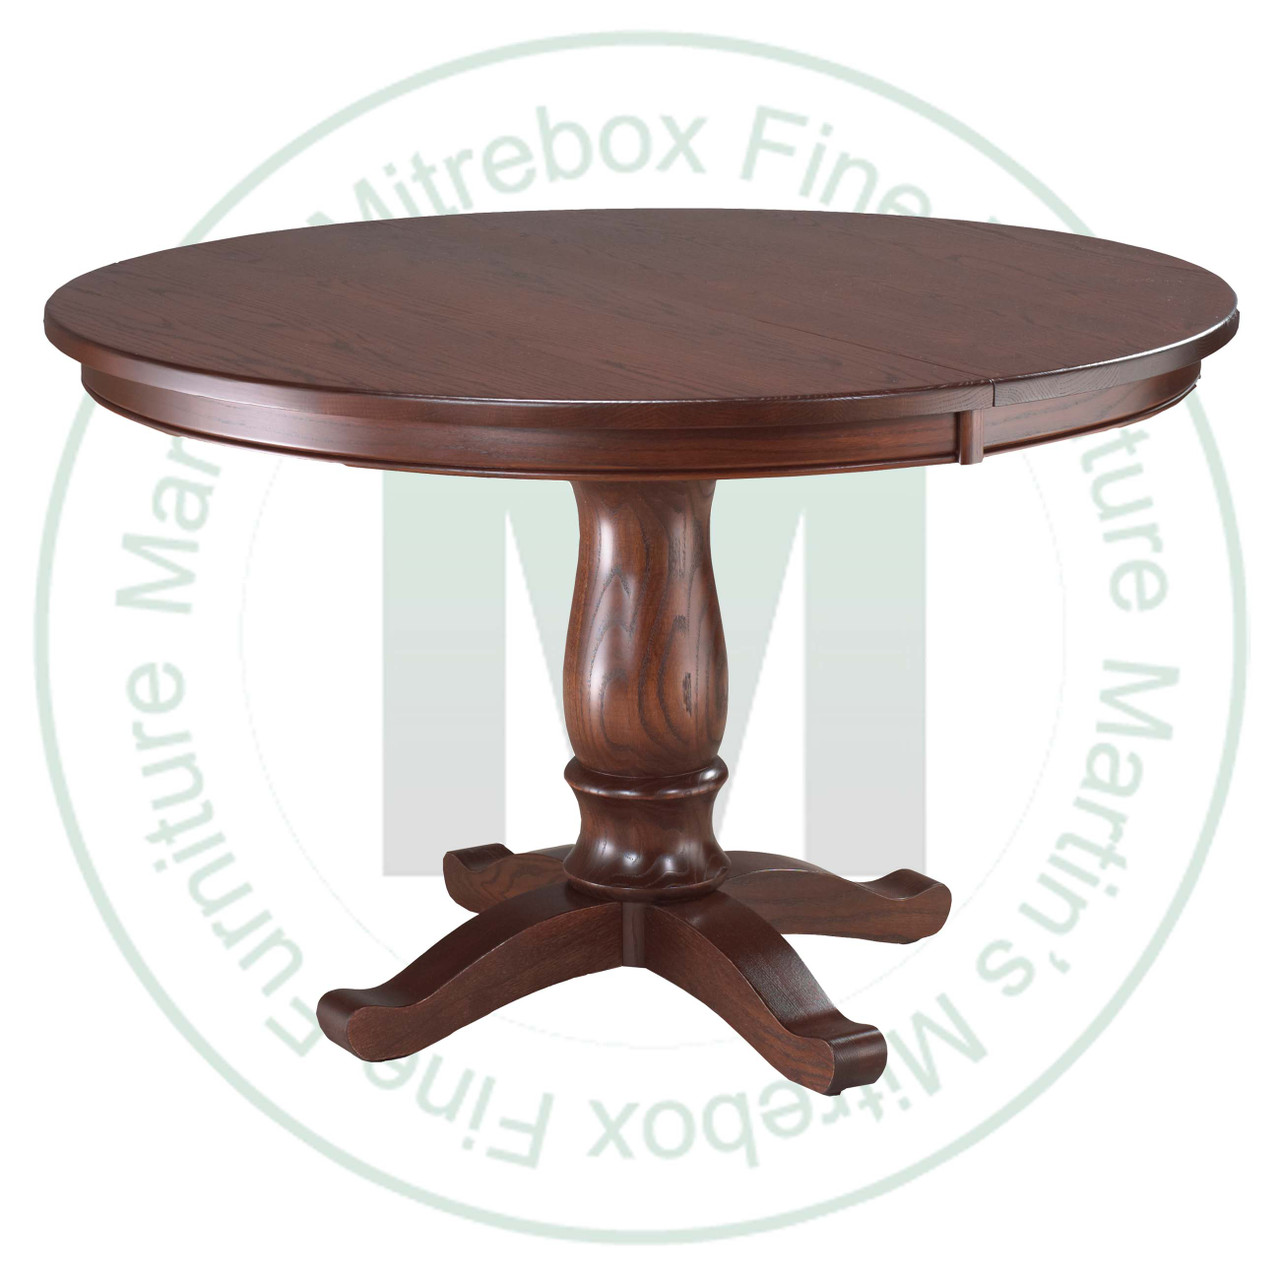 Oak Kimberly Crest Single Pedestal Table 36''D x 42''W x 30''H With 1 - 12'' Leaf Table